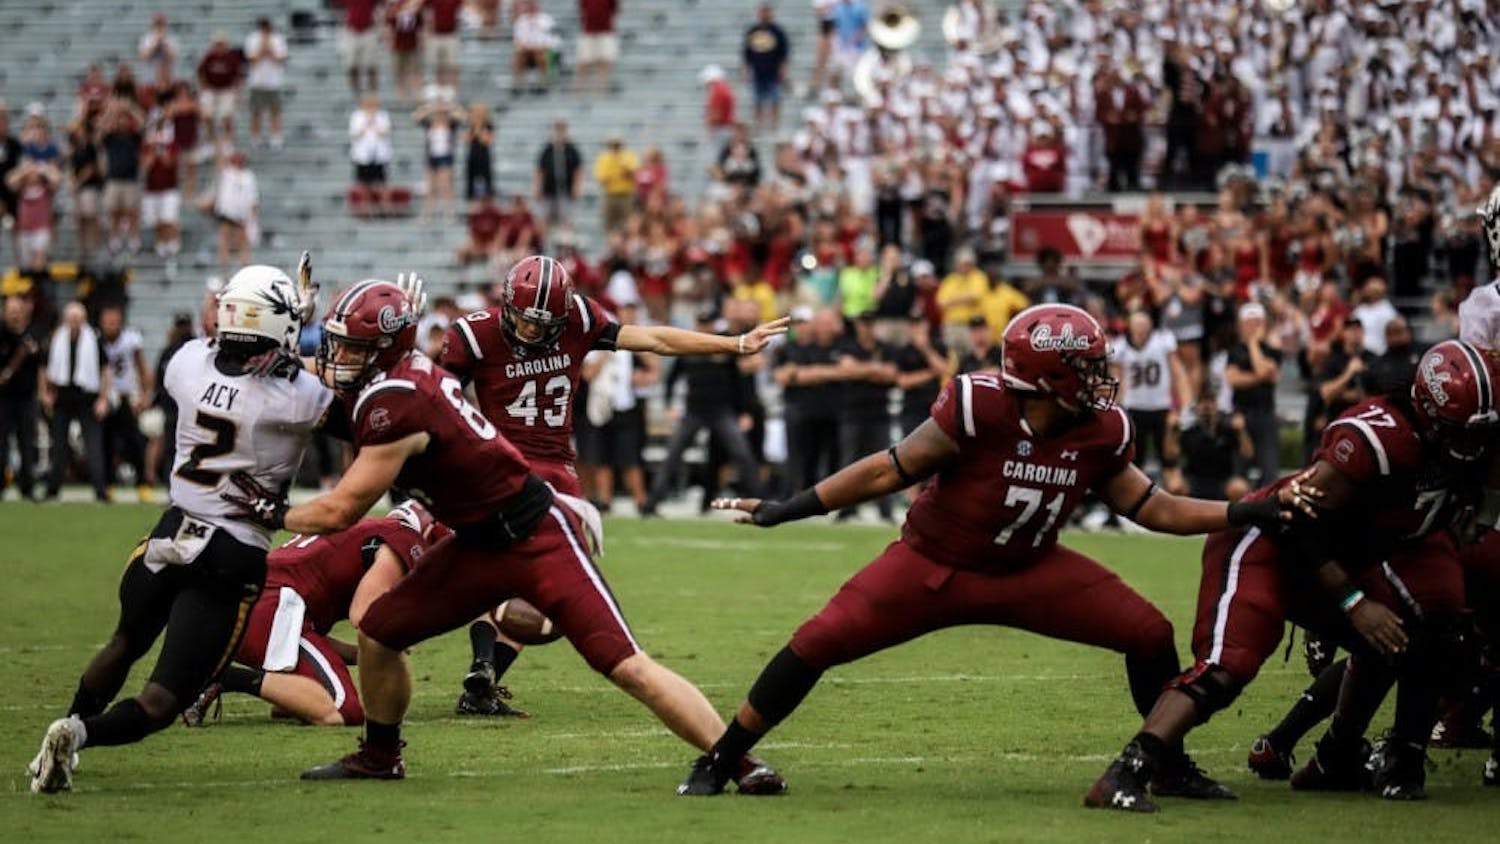 FILE—Senior kicker Parker White kicks a field goal during a game against Missouri on Oct. 6, 2018 at Williams-Brice Stadium in Columbia, SC. The Gamecocks beat the Tigers, 37-35.